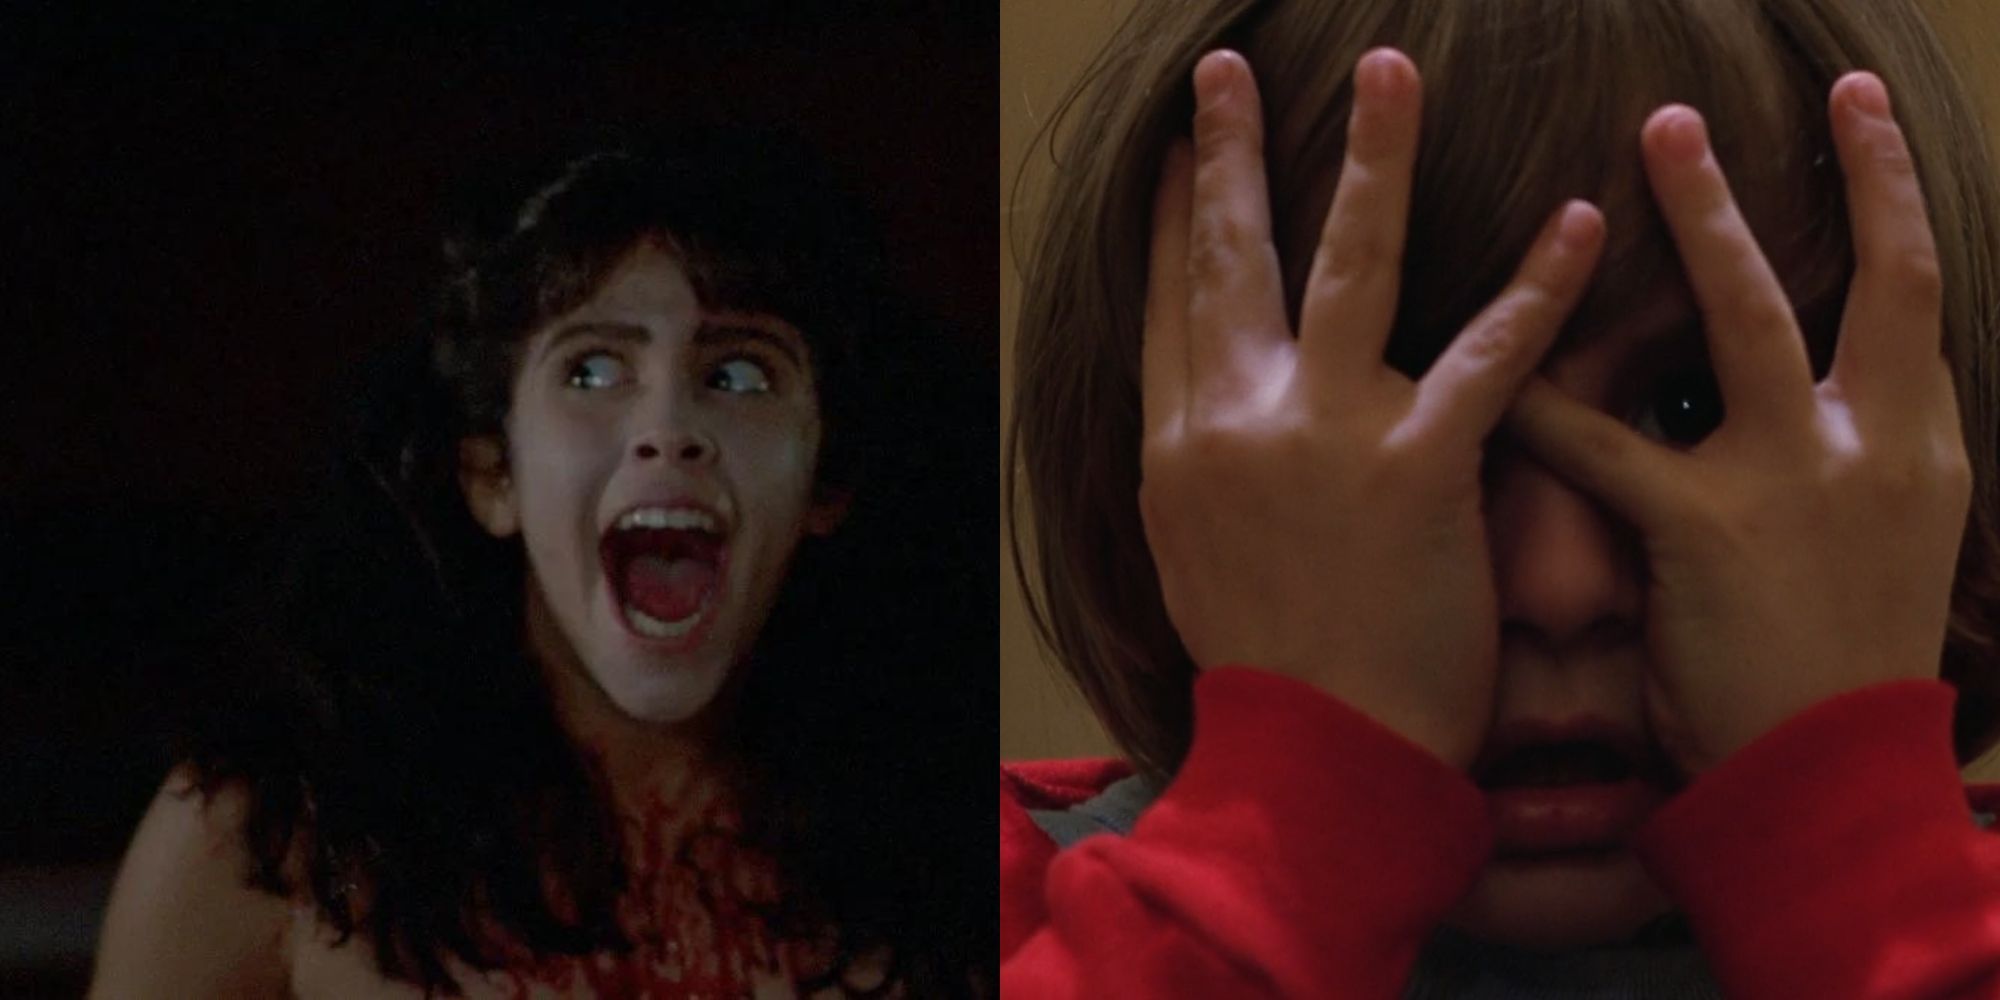 Still images of Sleepaway Camp on the left and The Shining on the right